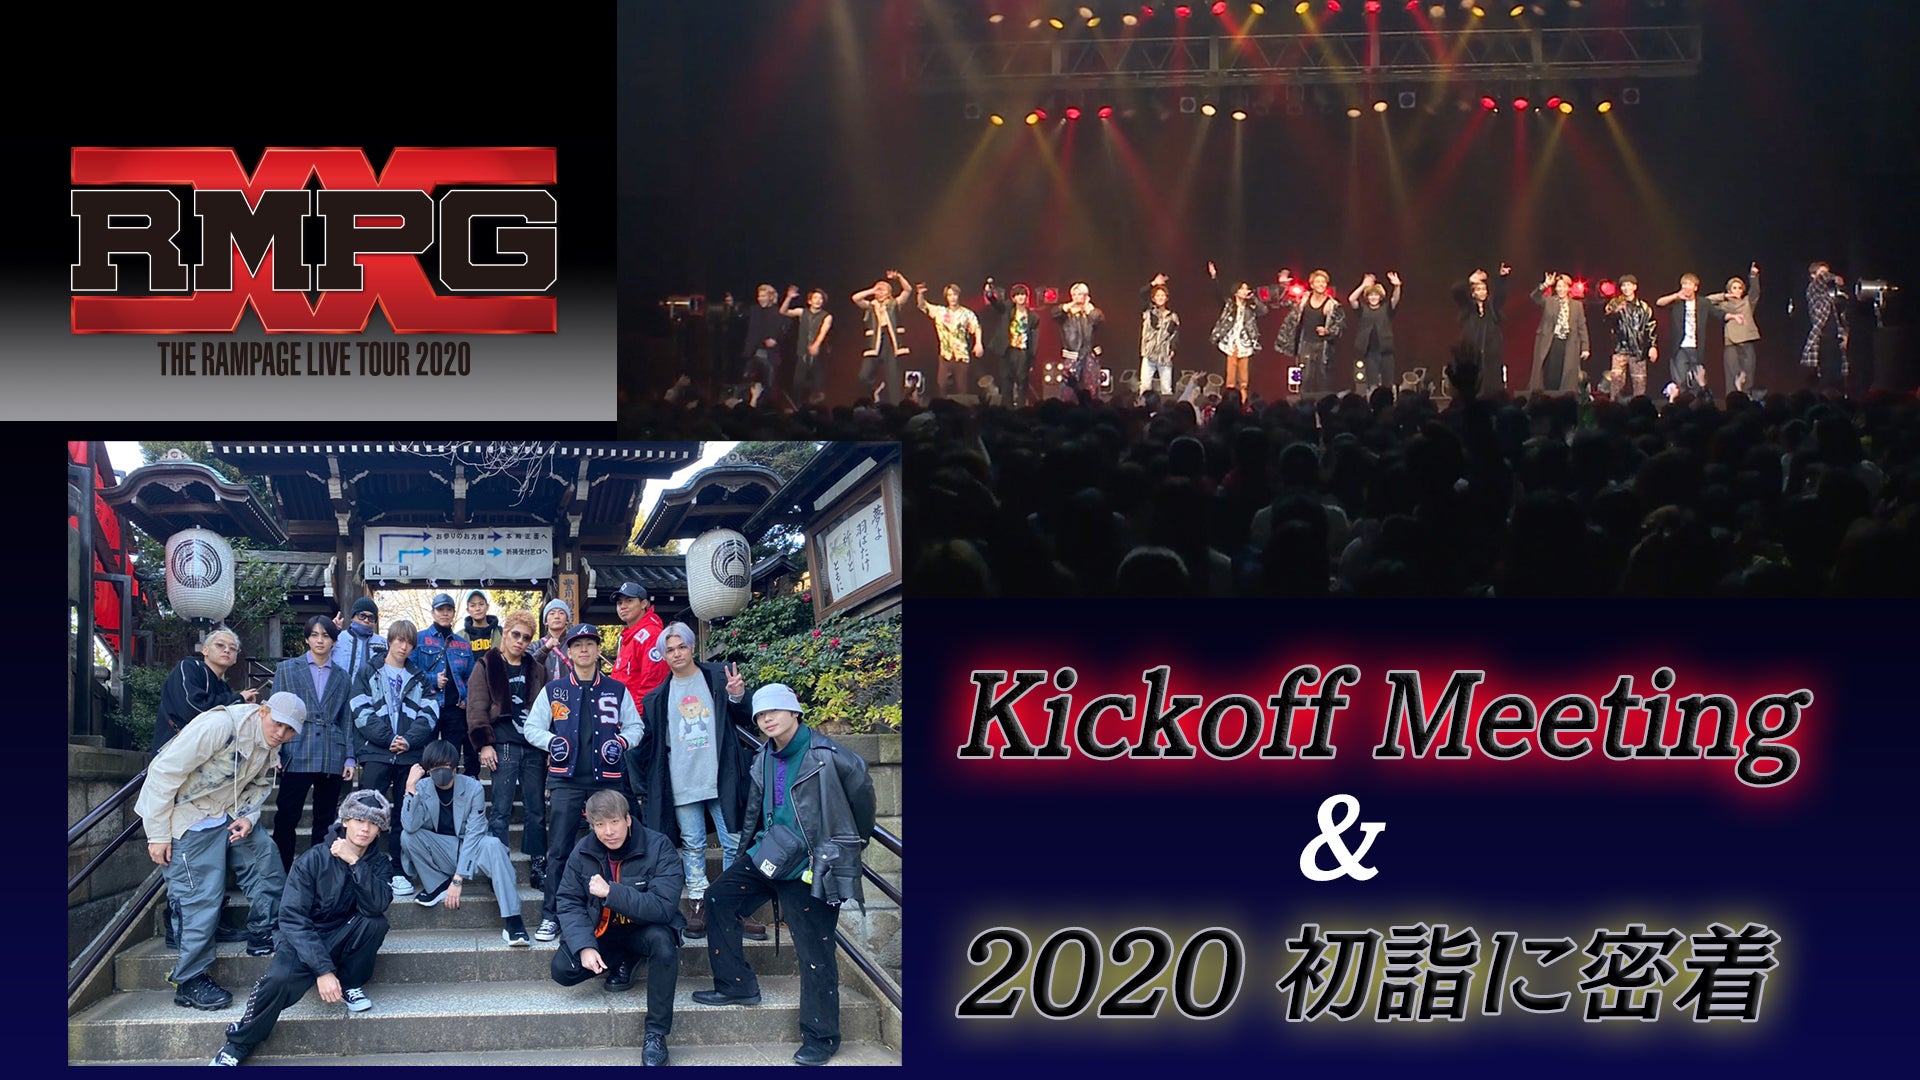 THE RAMPAGE LIVE TOUR 2020 “RMPG” Kickoff Meeting／2020初詣に密着！  2020/1/30(木)THE RAMPAGE